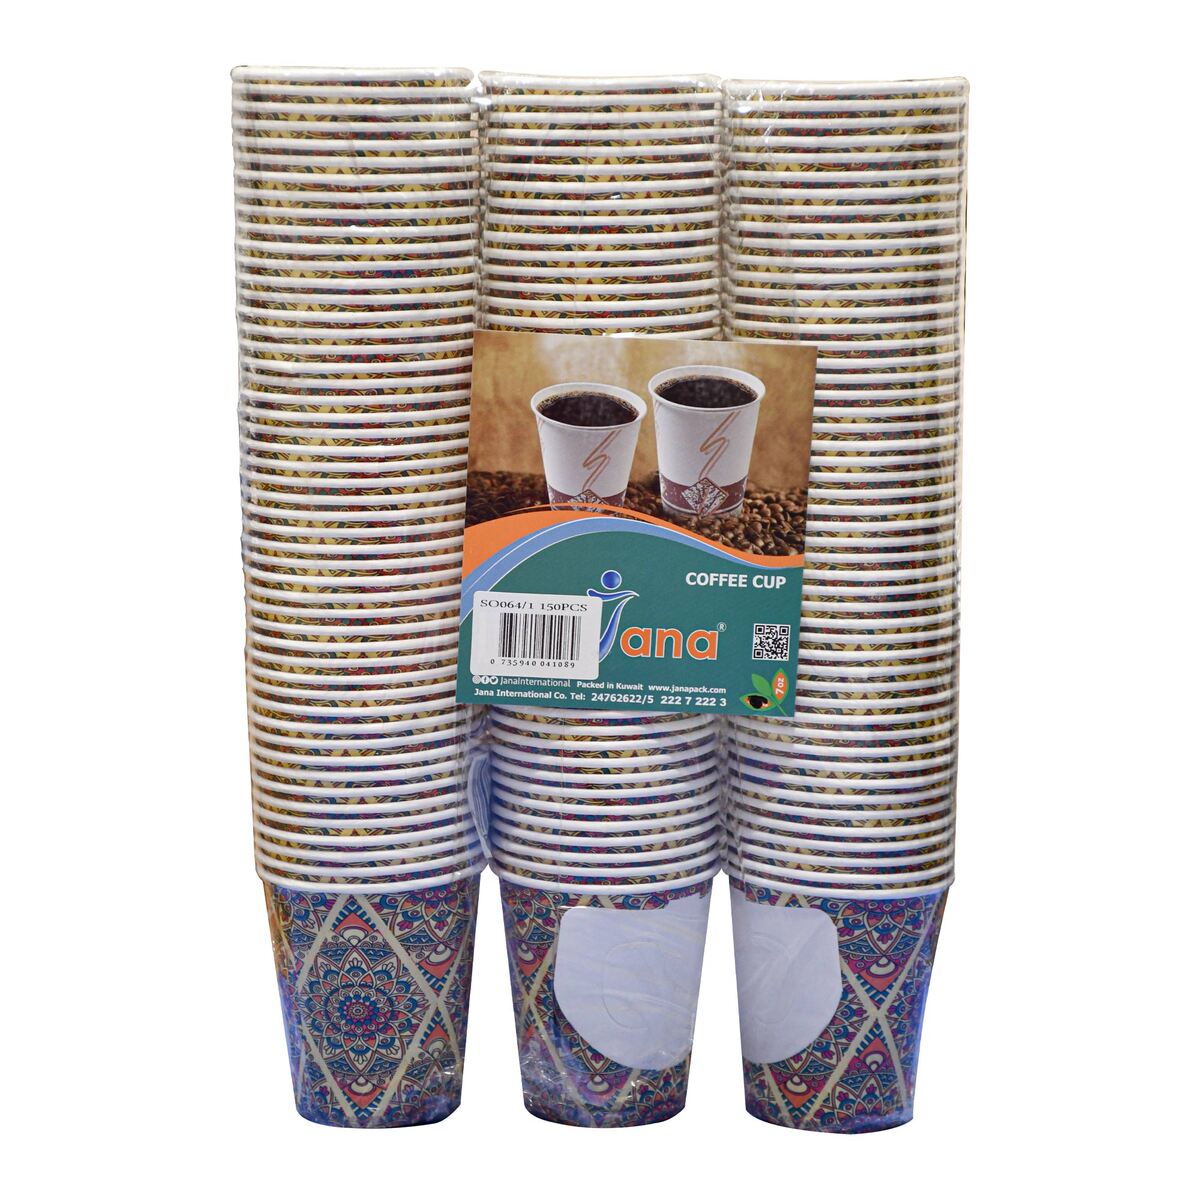 Jana Disposable Coffee Cup Capacity 7oz Value Pack 3 x 50 pcs